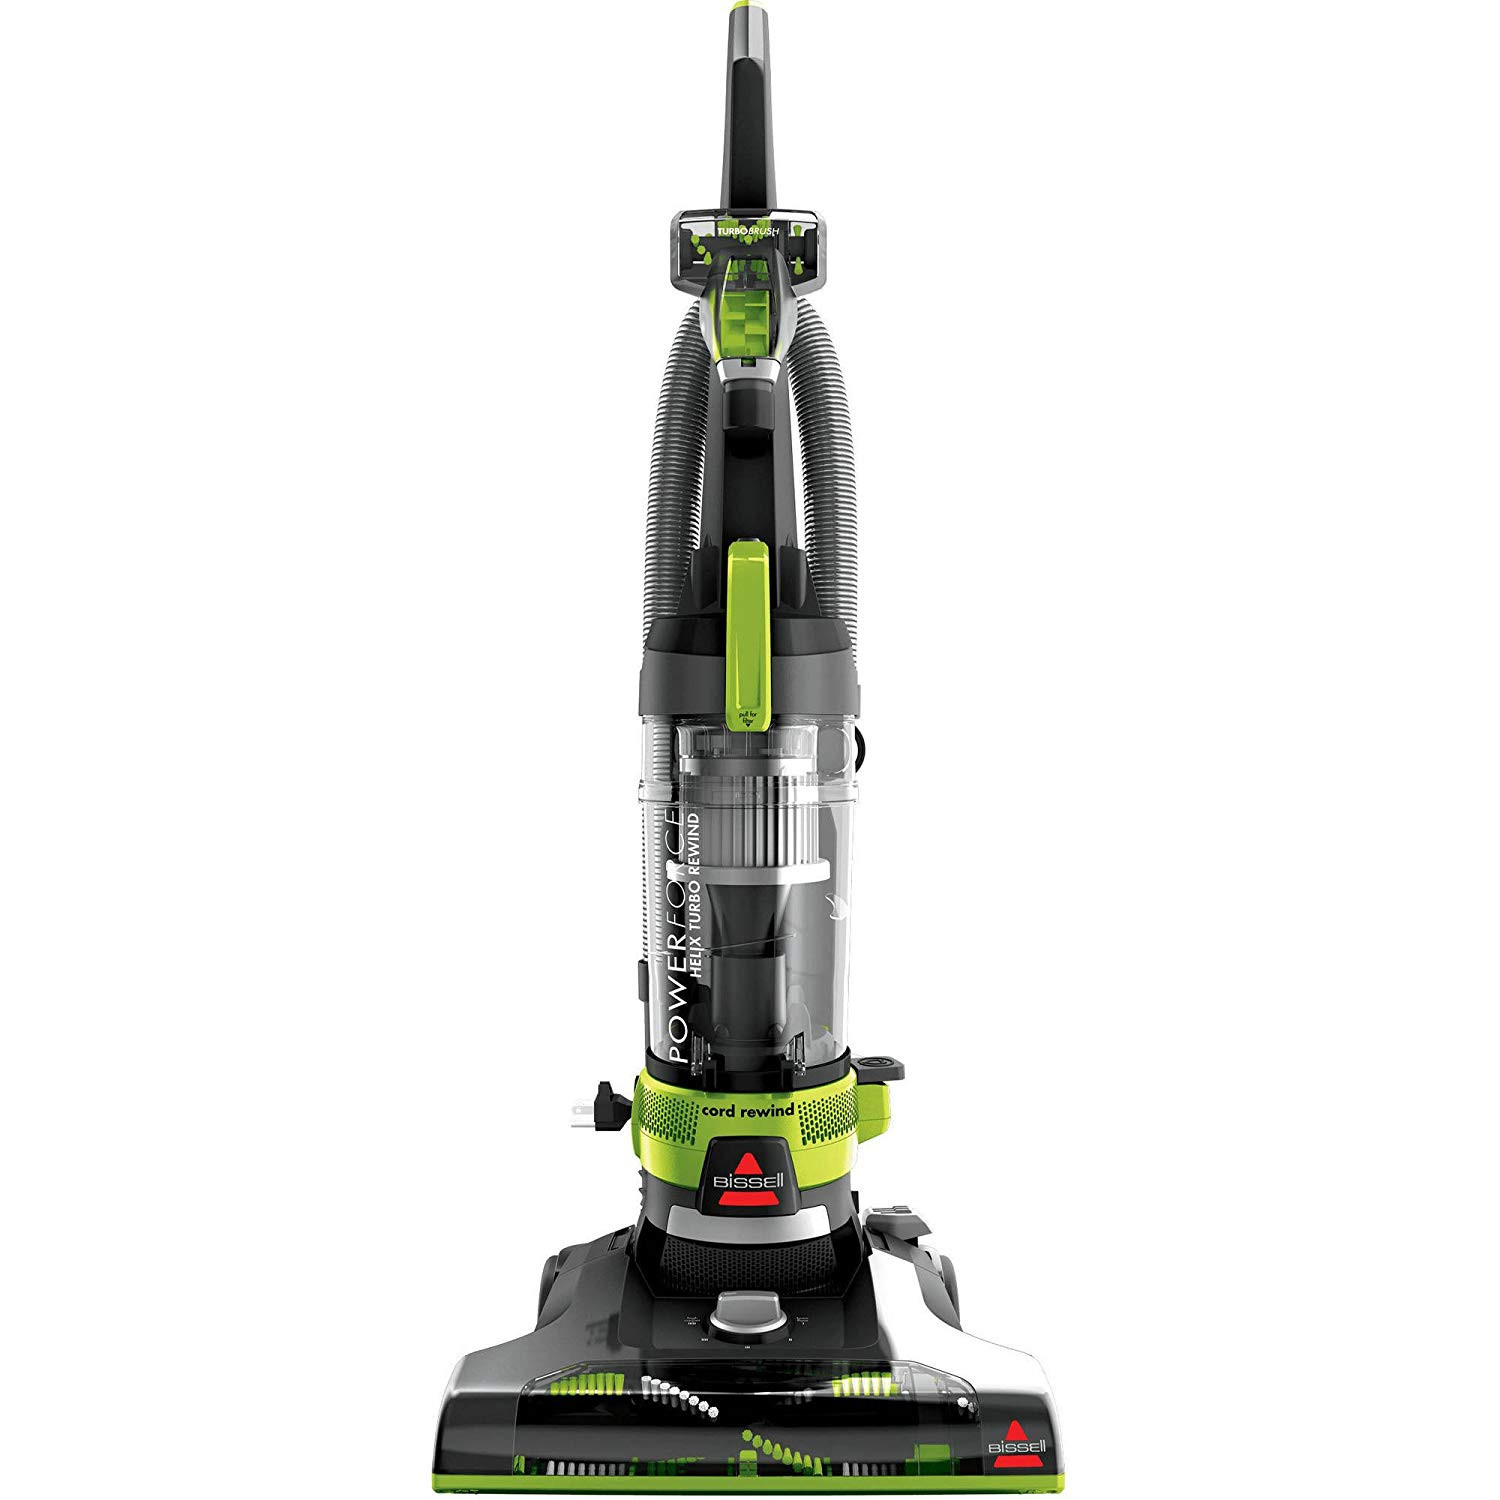 bissell hardwood floor expert vacuum of amazon com bissell powerforce helix turbo rewind corded bagless for amazon com bissell powerforce helix turbo rewind corded bagless upright vacuum with free lysol all purpose cleaner 32 ounce